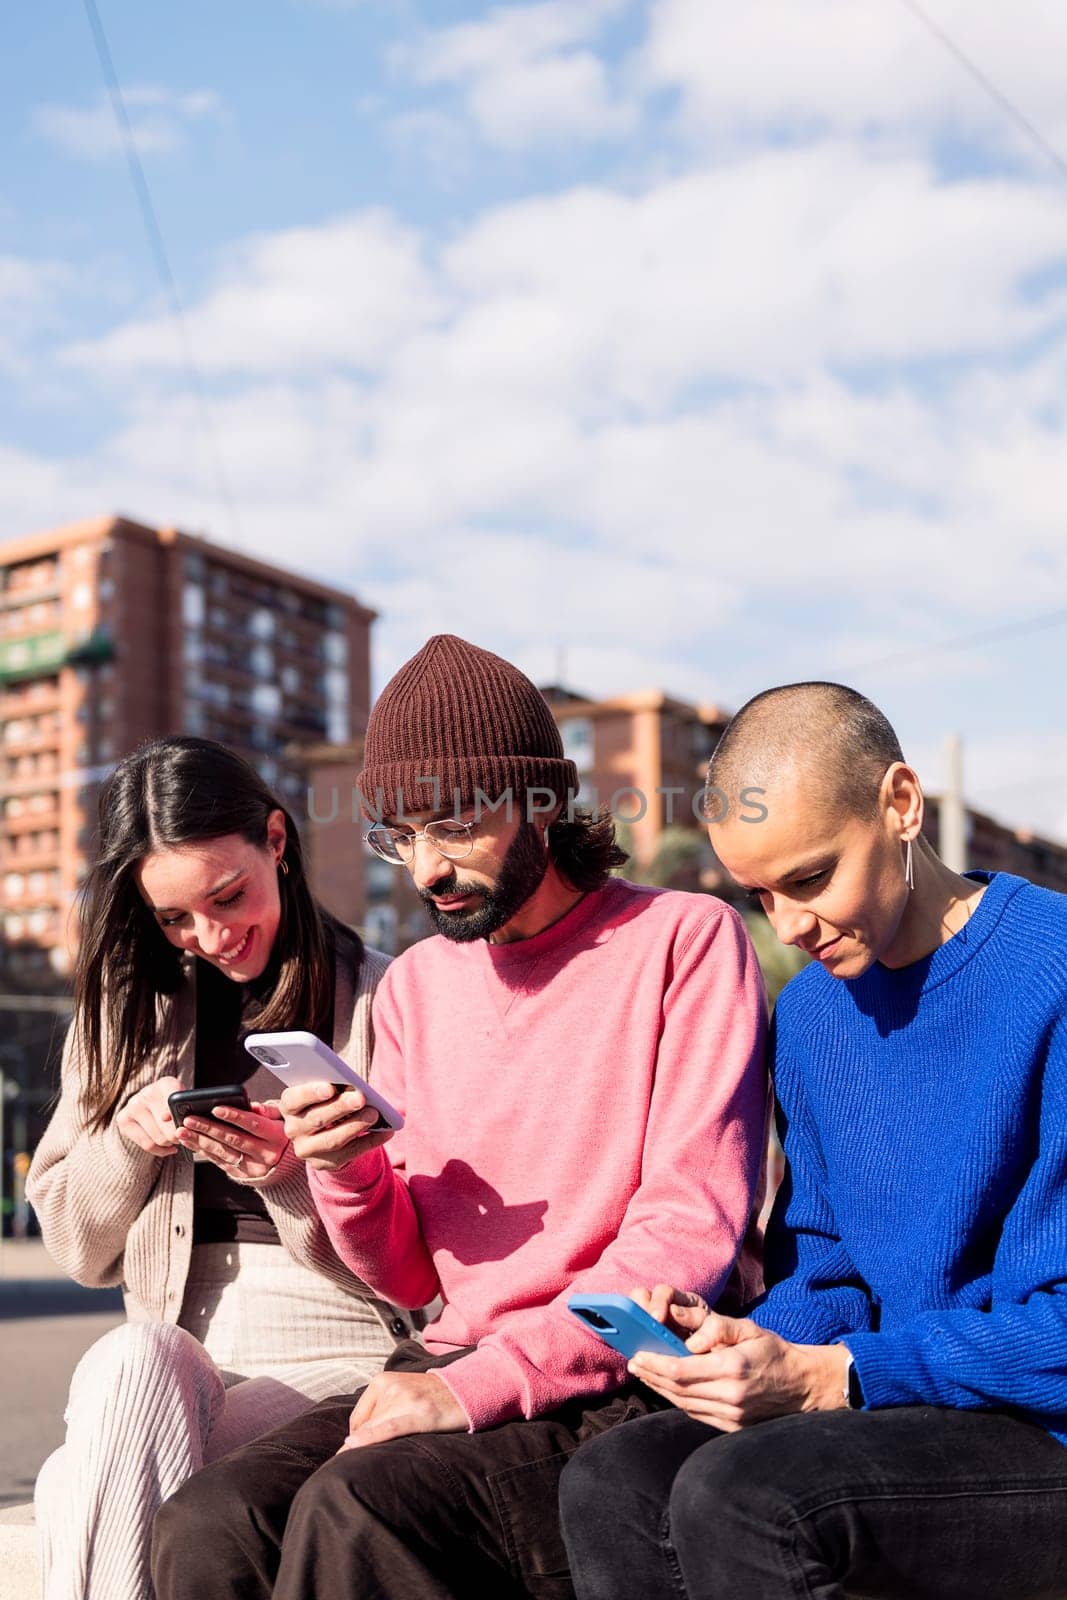 three young adults using mobile phones at city, concept of modern urban lifestyle and technology of communication, copy space for text